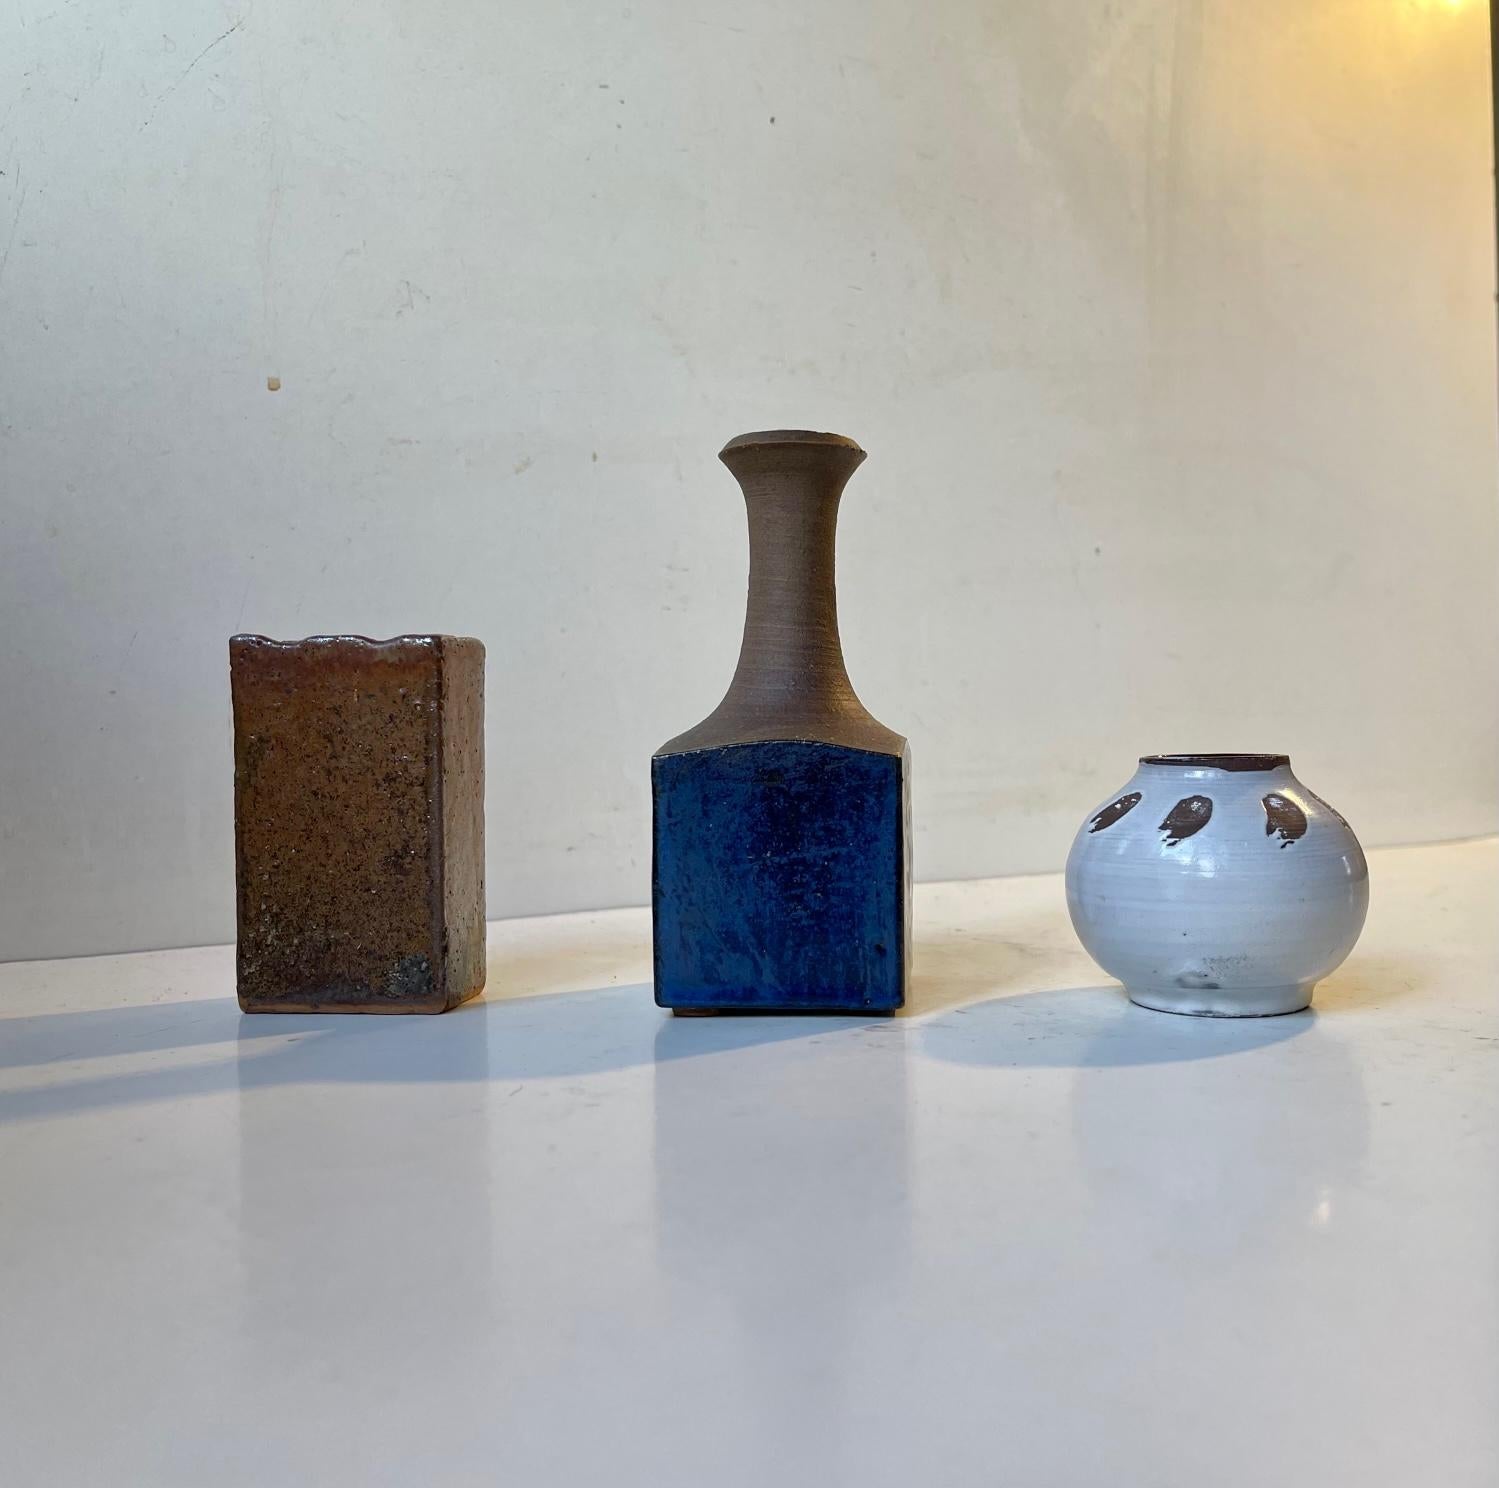 Mixed lot of 3 small Scandinavian ceramic vases. All studio made by diffrent Scandinavian designers/ceramist. Styles: Nordic abstract, midcentury. Measurements: Vase 1: 11/5/5 cm, Vase 2: 5.5/5 cm, Vase 3: 8/4.5/3 cm. The price is for the set of 3.